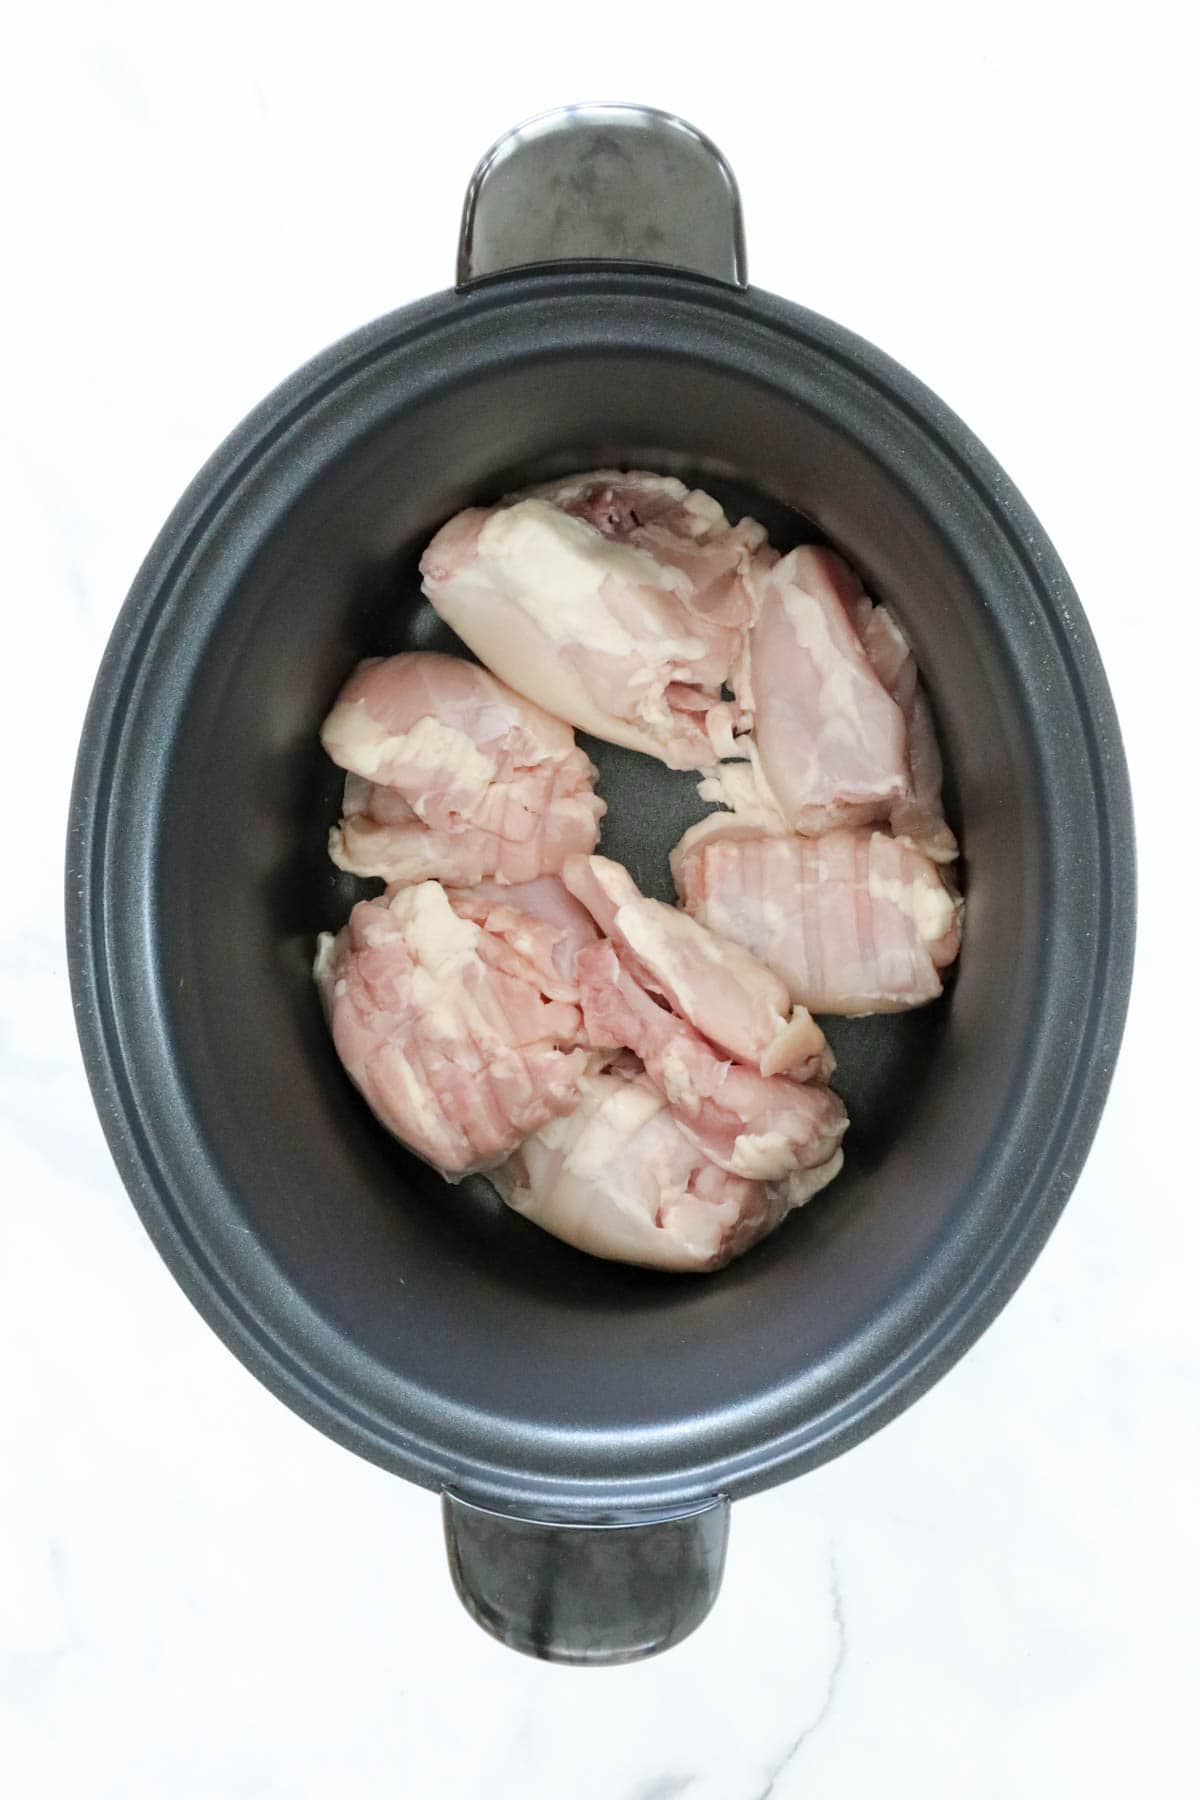 Chicken thigh fillets in the base of a crockpot.